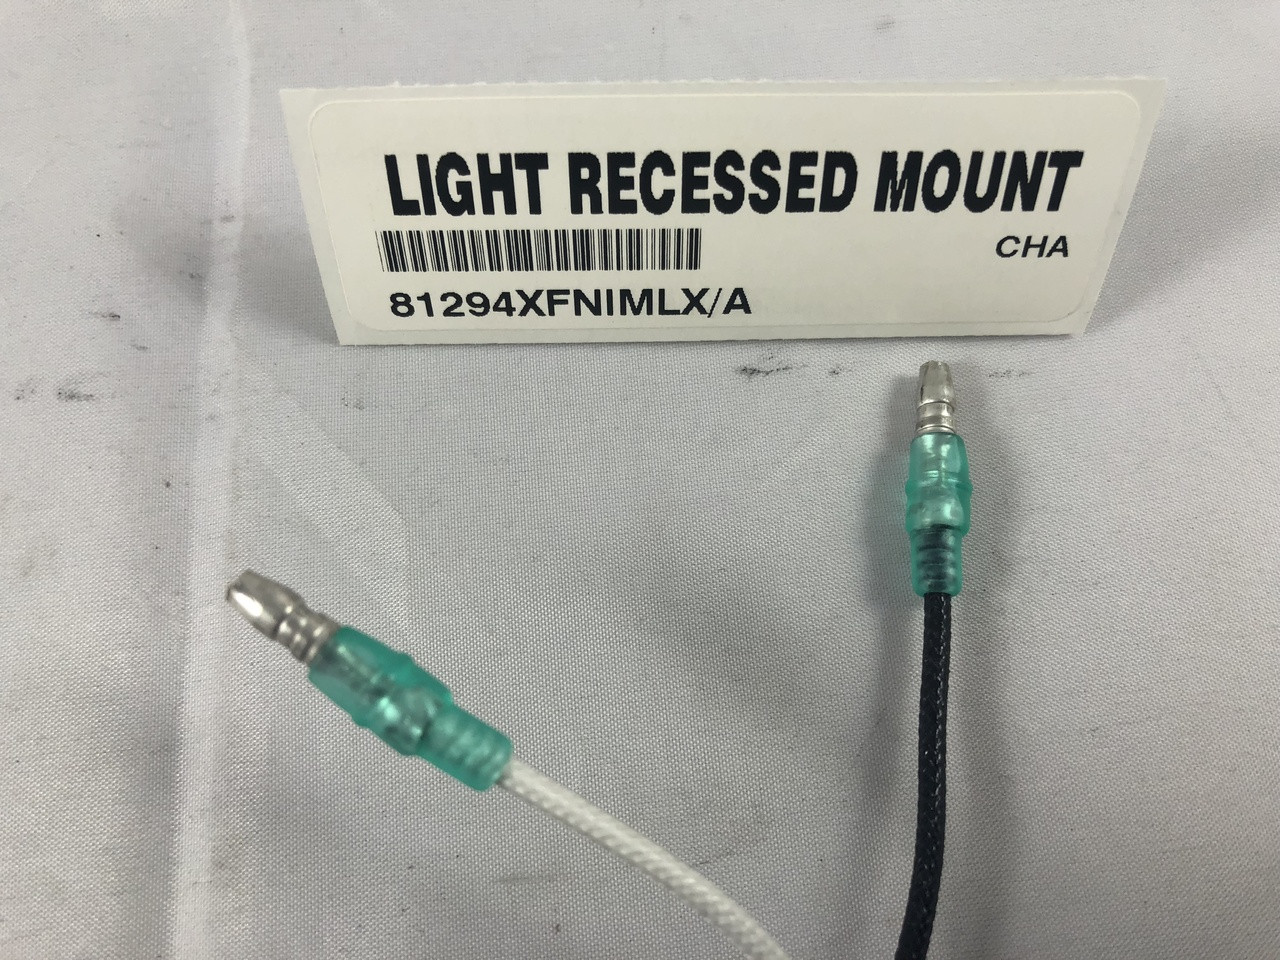 LIGHT RECESSED MOUNT OVERHEAD *Sorry this part is no longer available